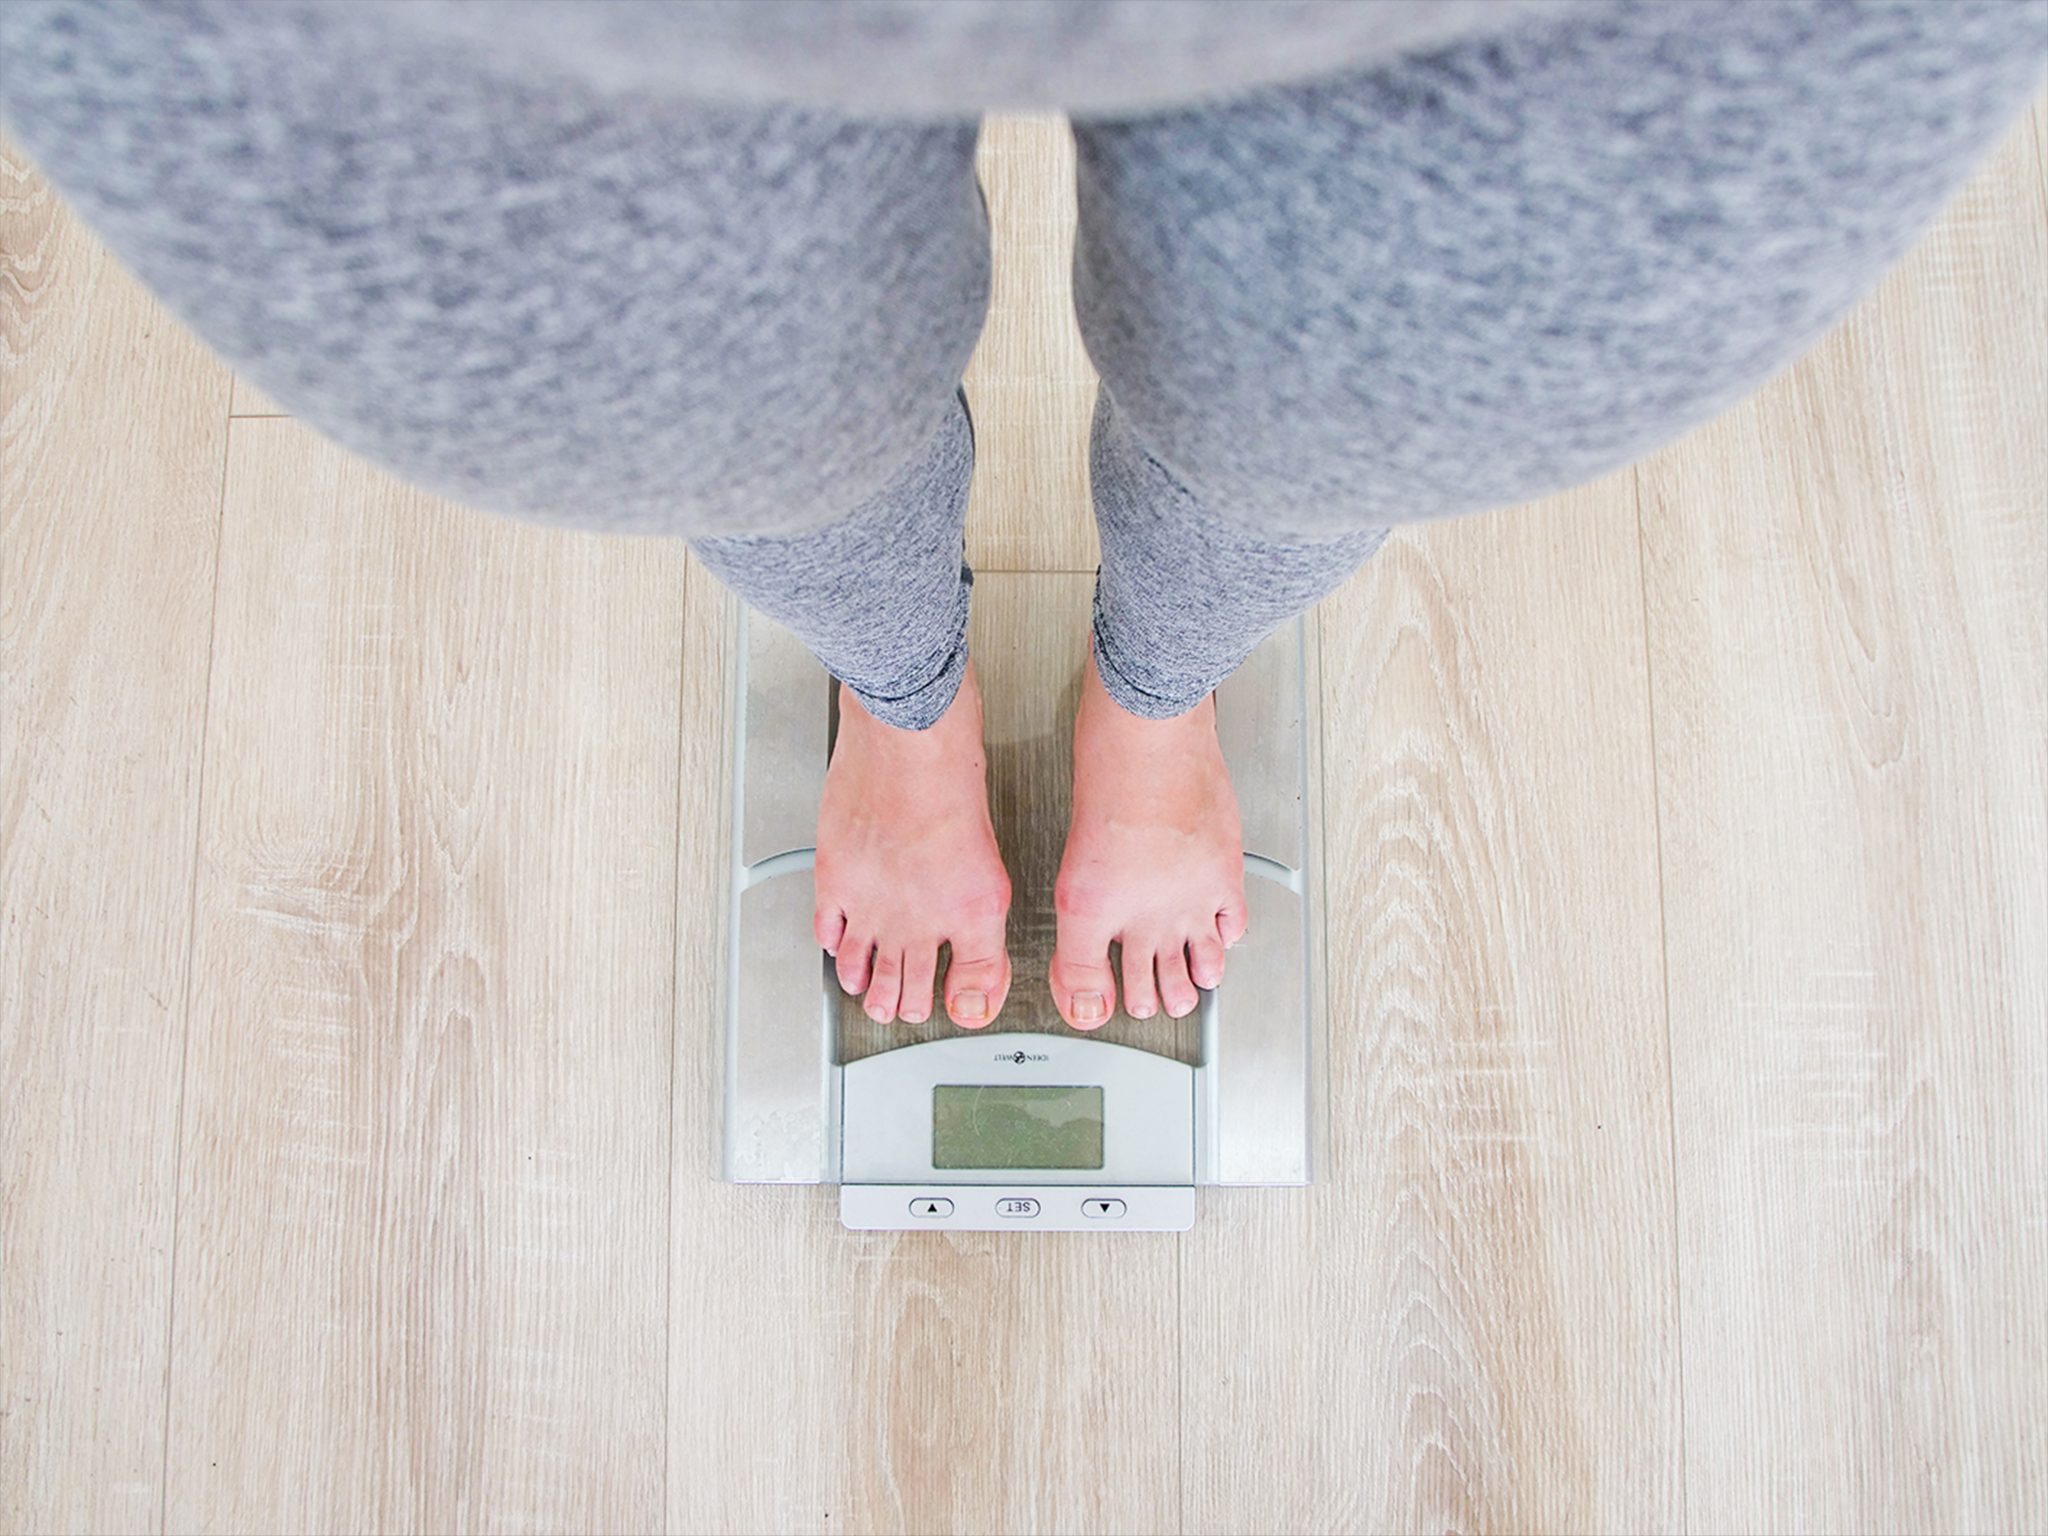 Women on weighing scales